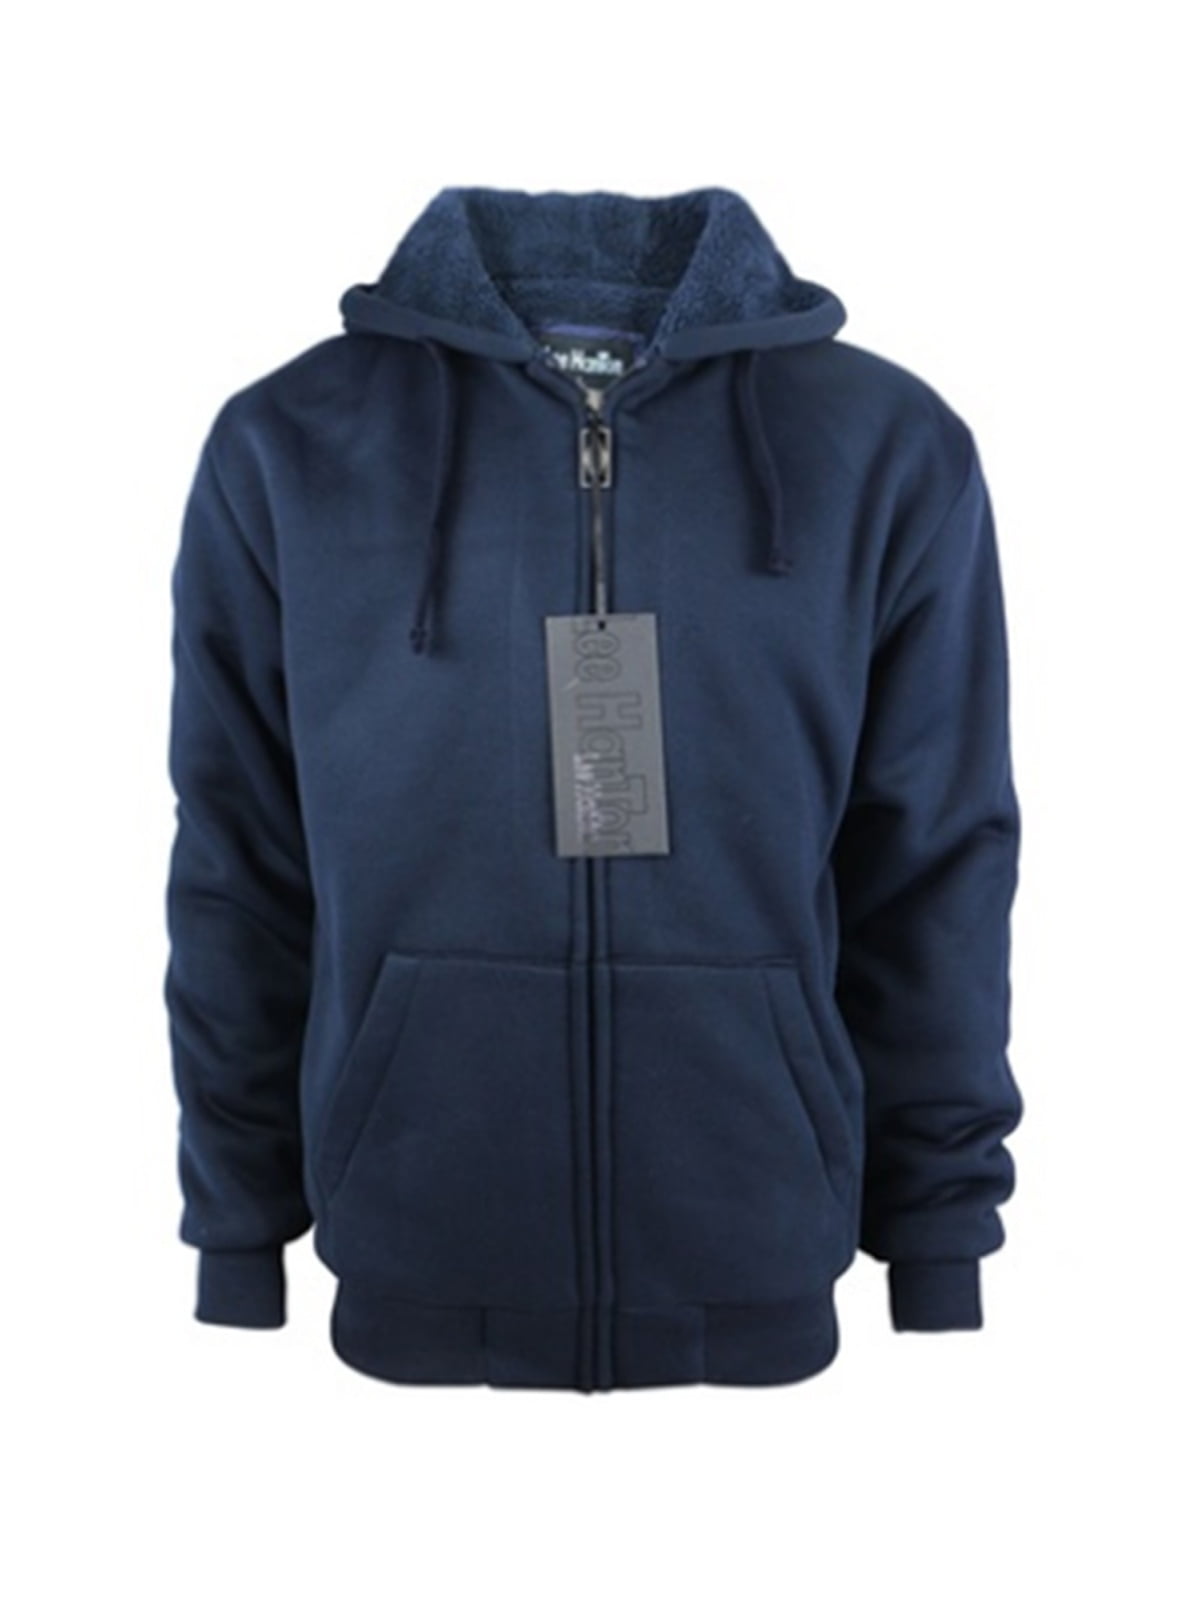 Men's Navy Blue Winter Heavyweight Sherpa-Lined Hoodie with Adjustable ...